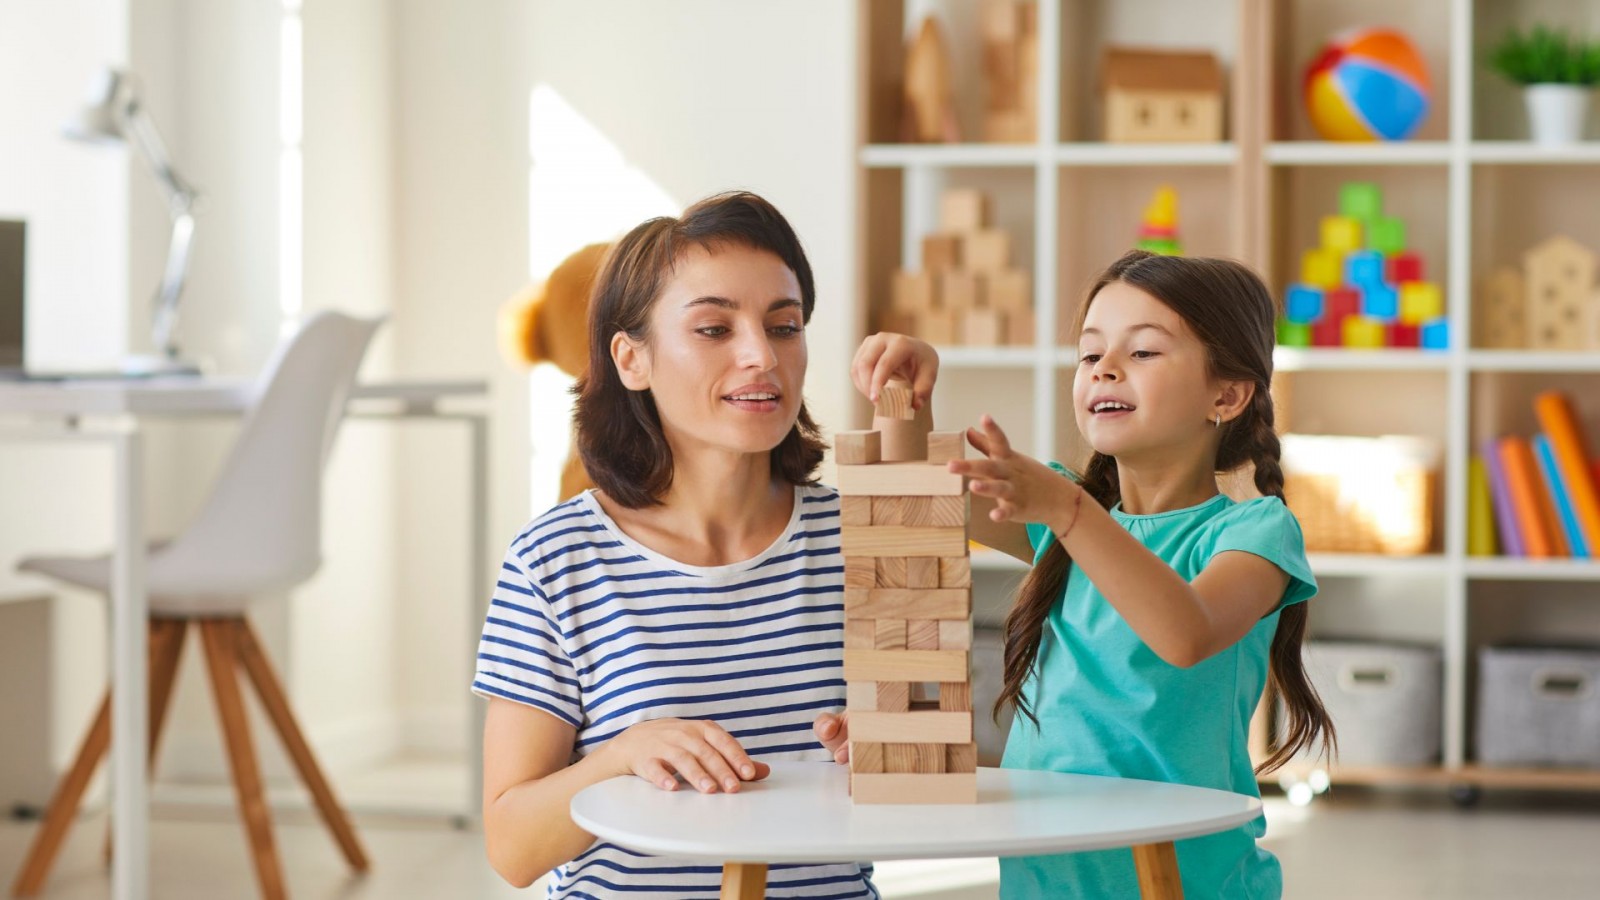 Image of woman and child playing with wooden blocks